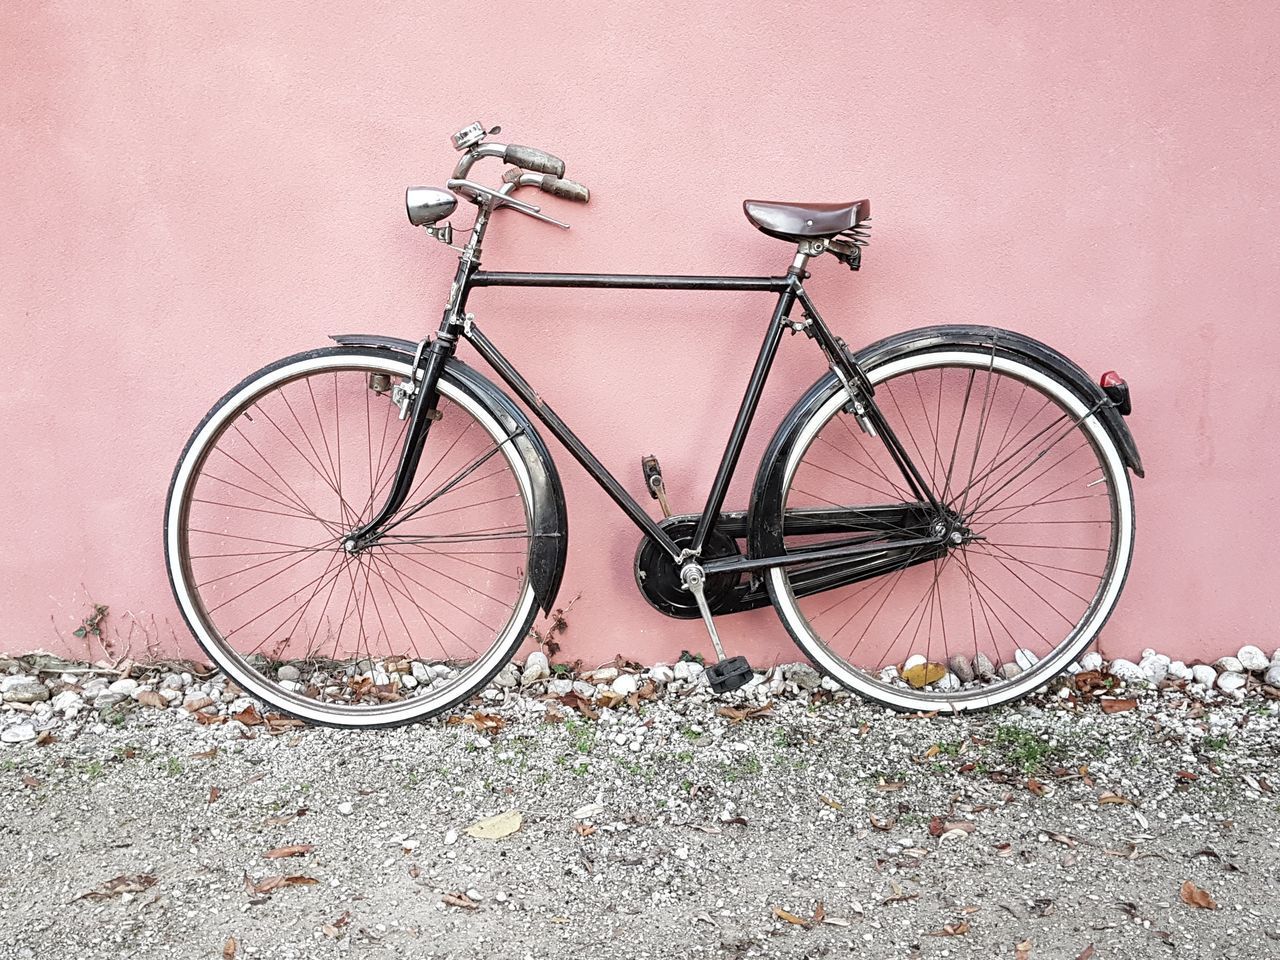 HIGH ANGLE VIEW OF BICYCLE PARKED BY PINK WALL